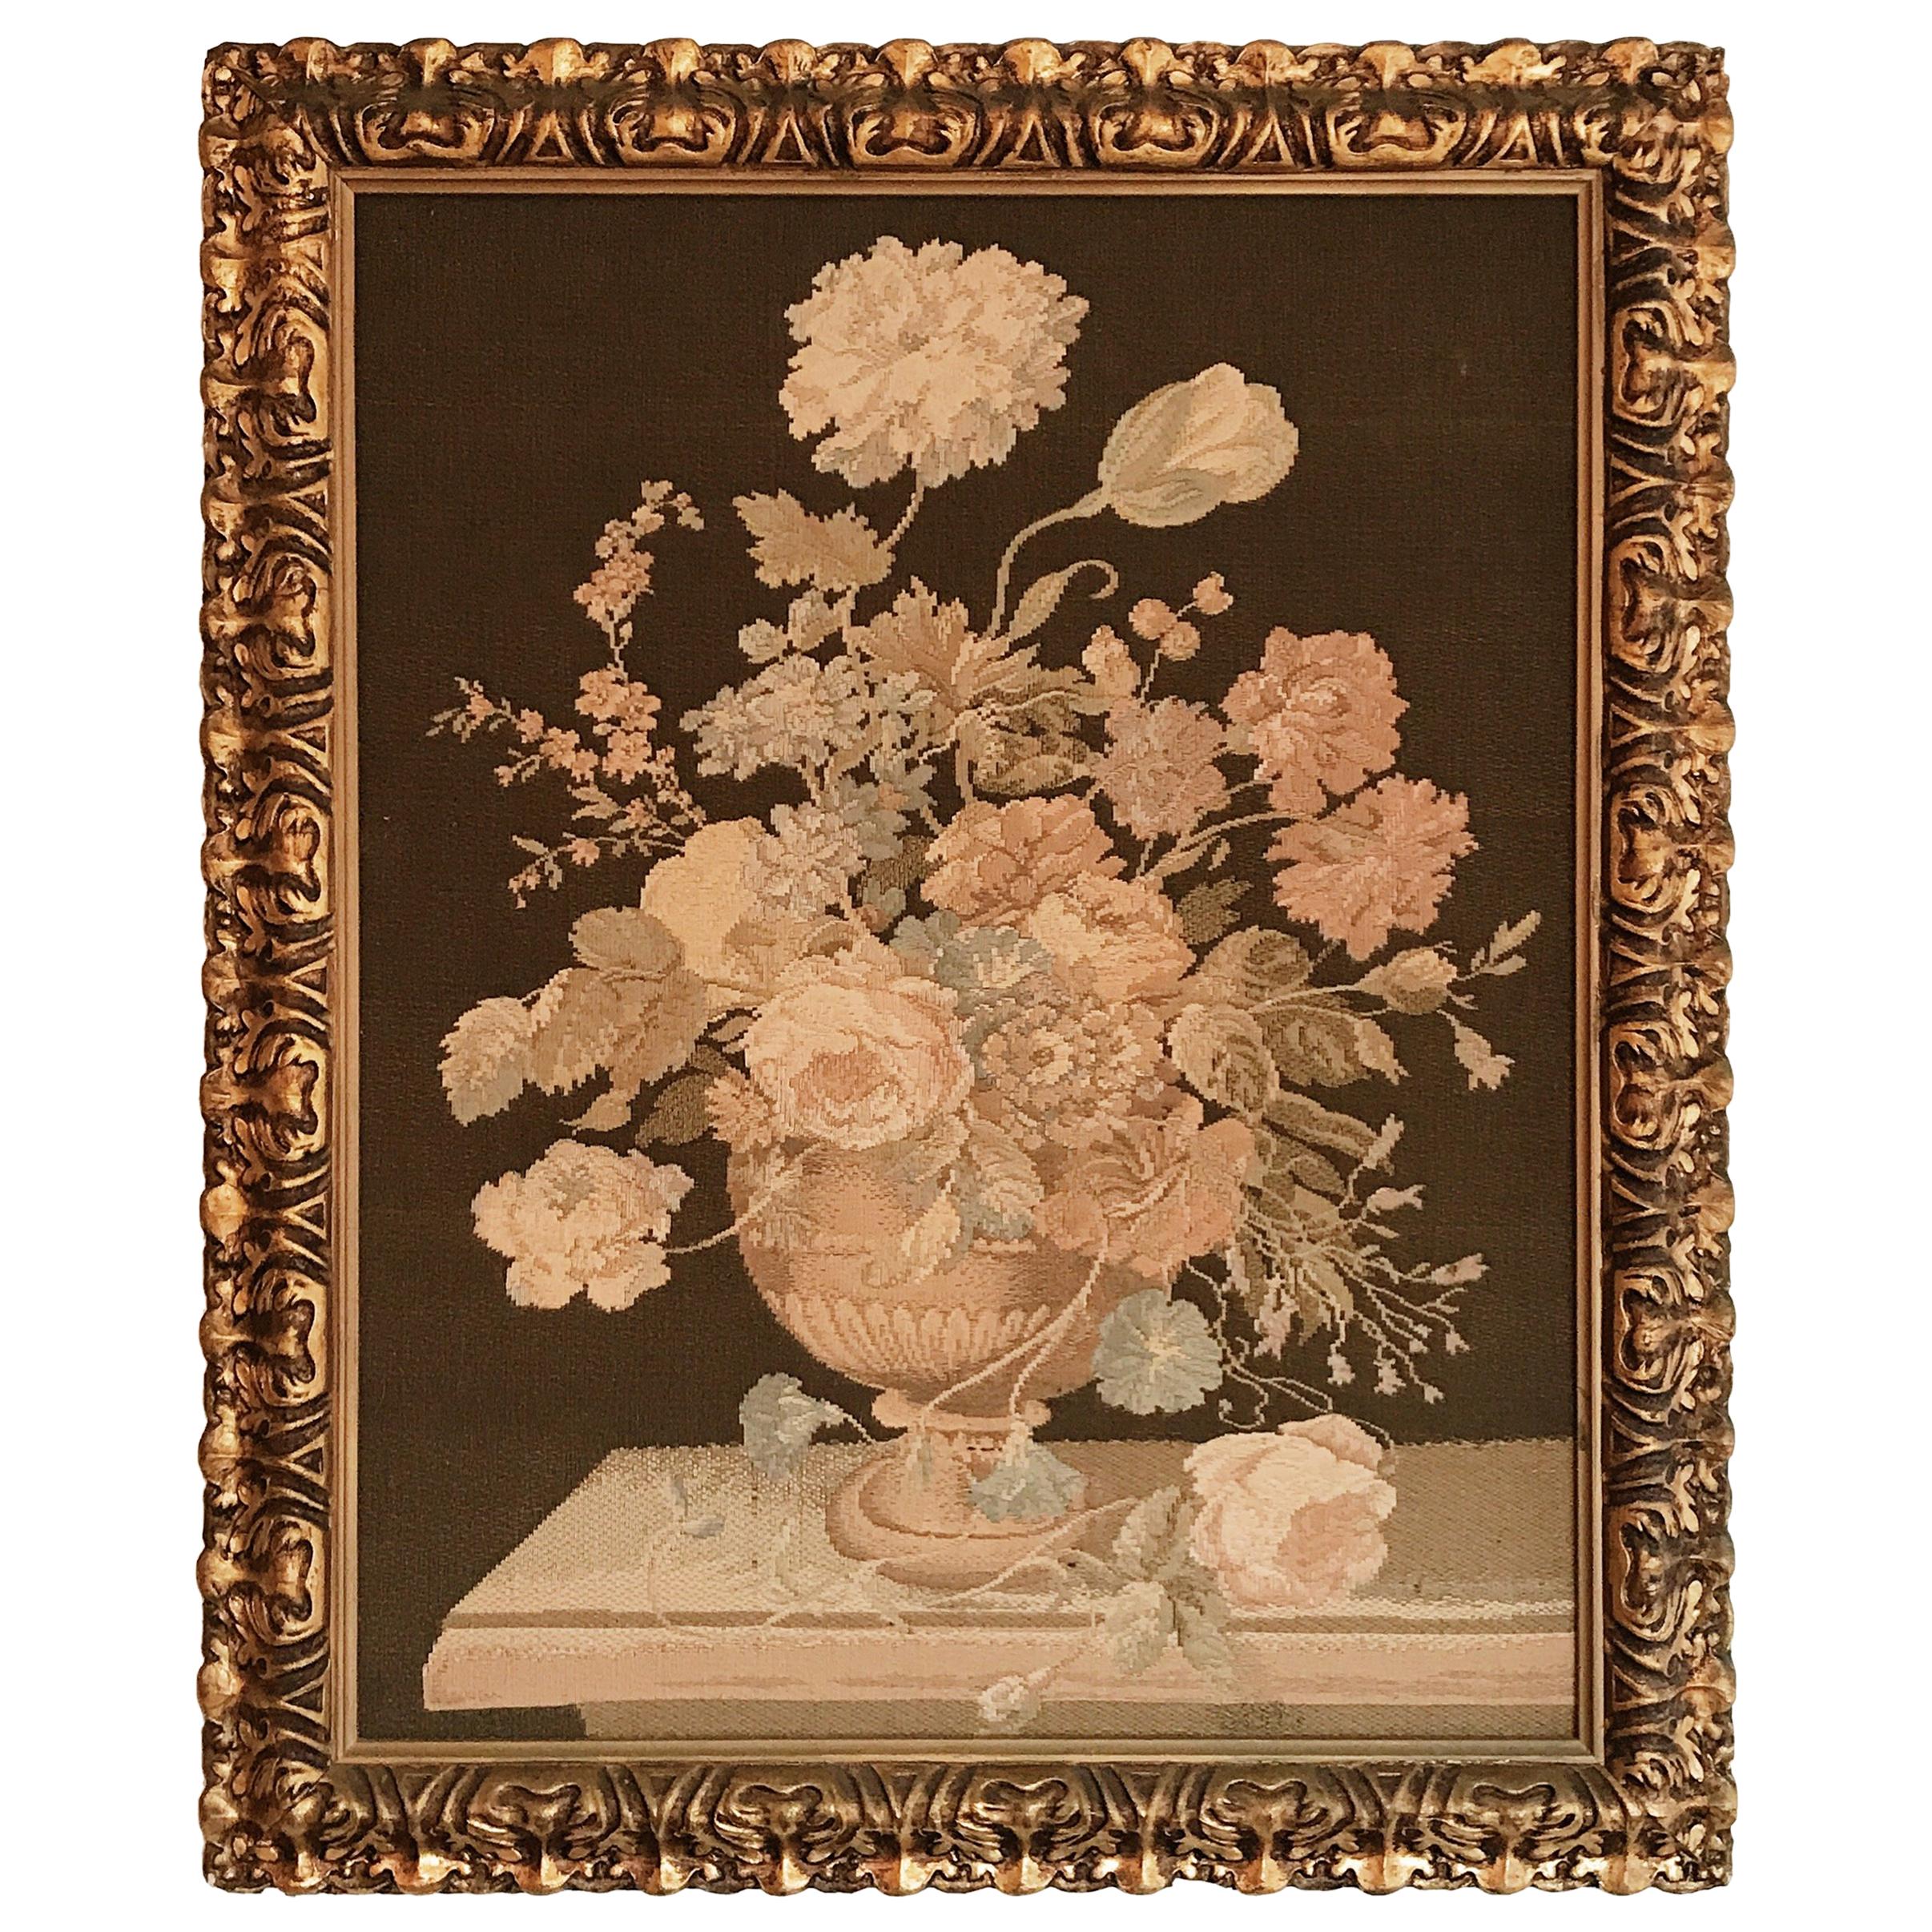 Early Machine Loom Floral Italian Tapestry in Mid-20th Century Giltwood Frame For Sale